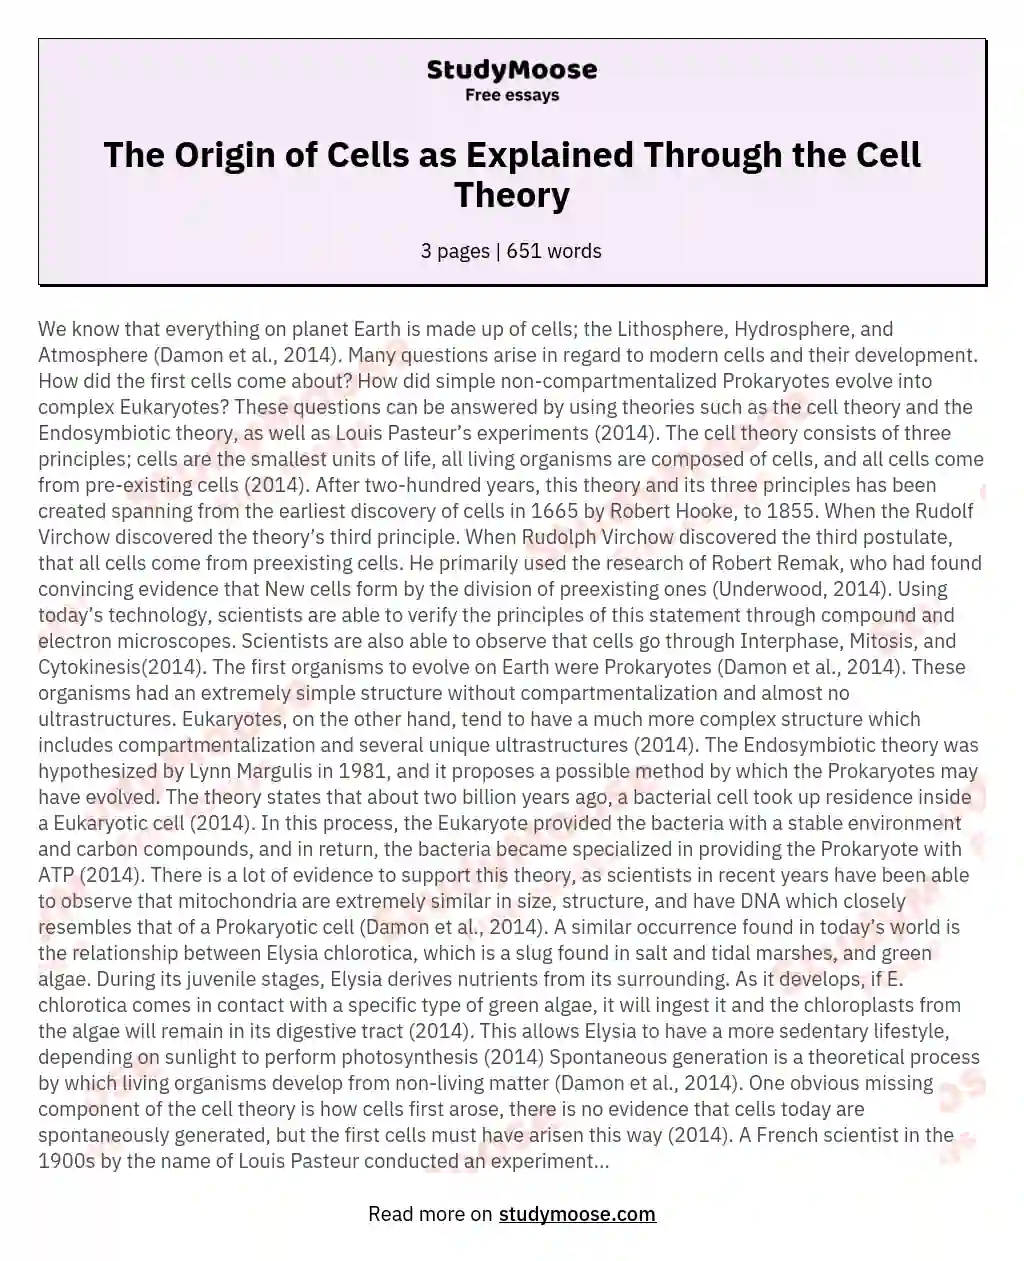 The Origin of Cells as Explained Through the Cell Theory